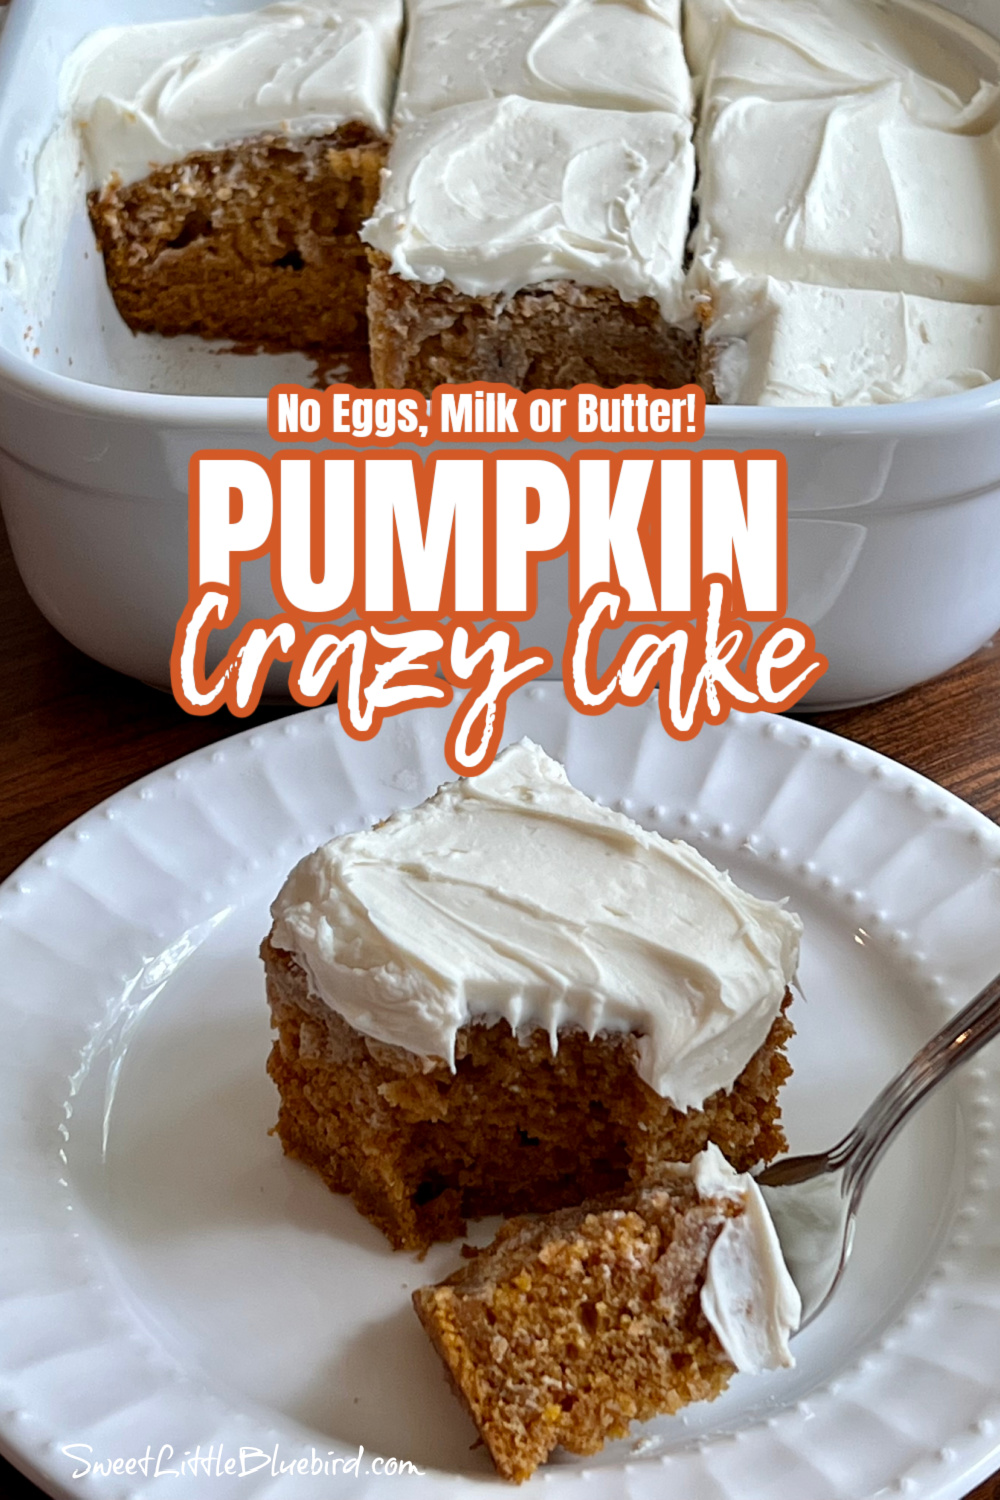 Pumpkin crazy cake with vanilla frosting in a white baking dish, cut into square pieces with a piece of cake served on a white plate with a fork full of cake, ready to eat. 